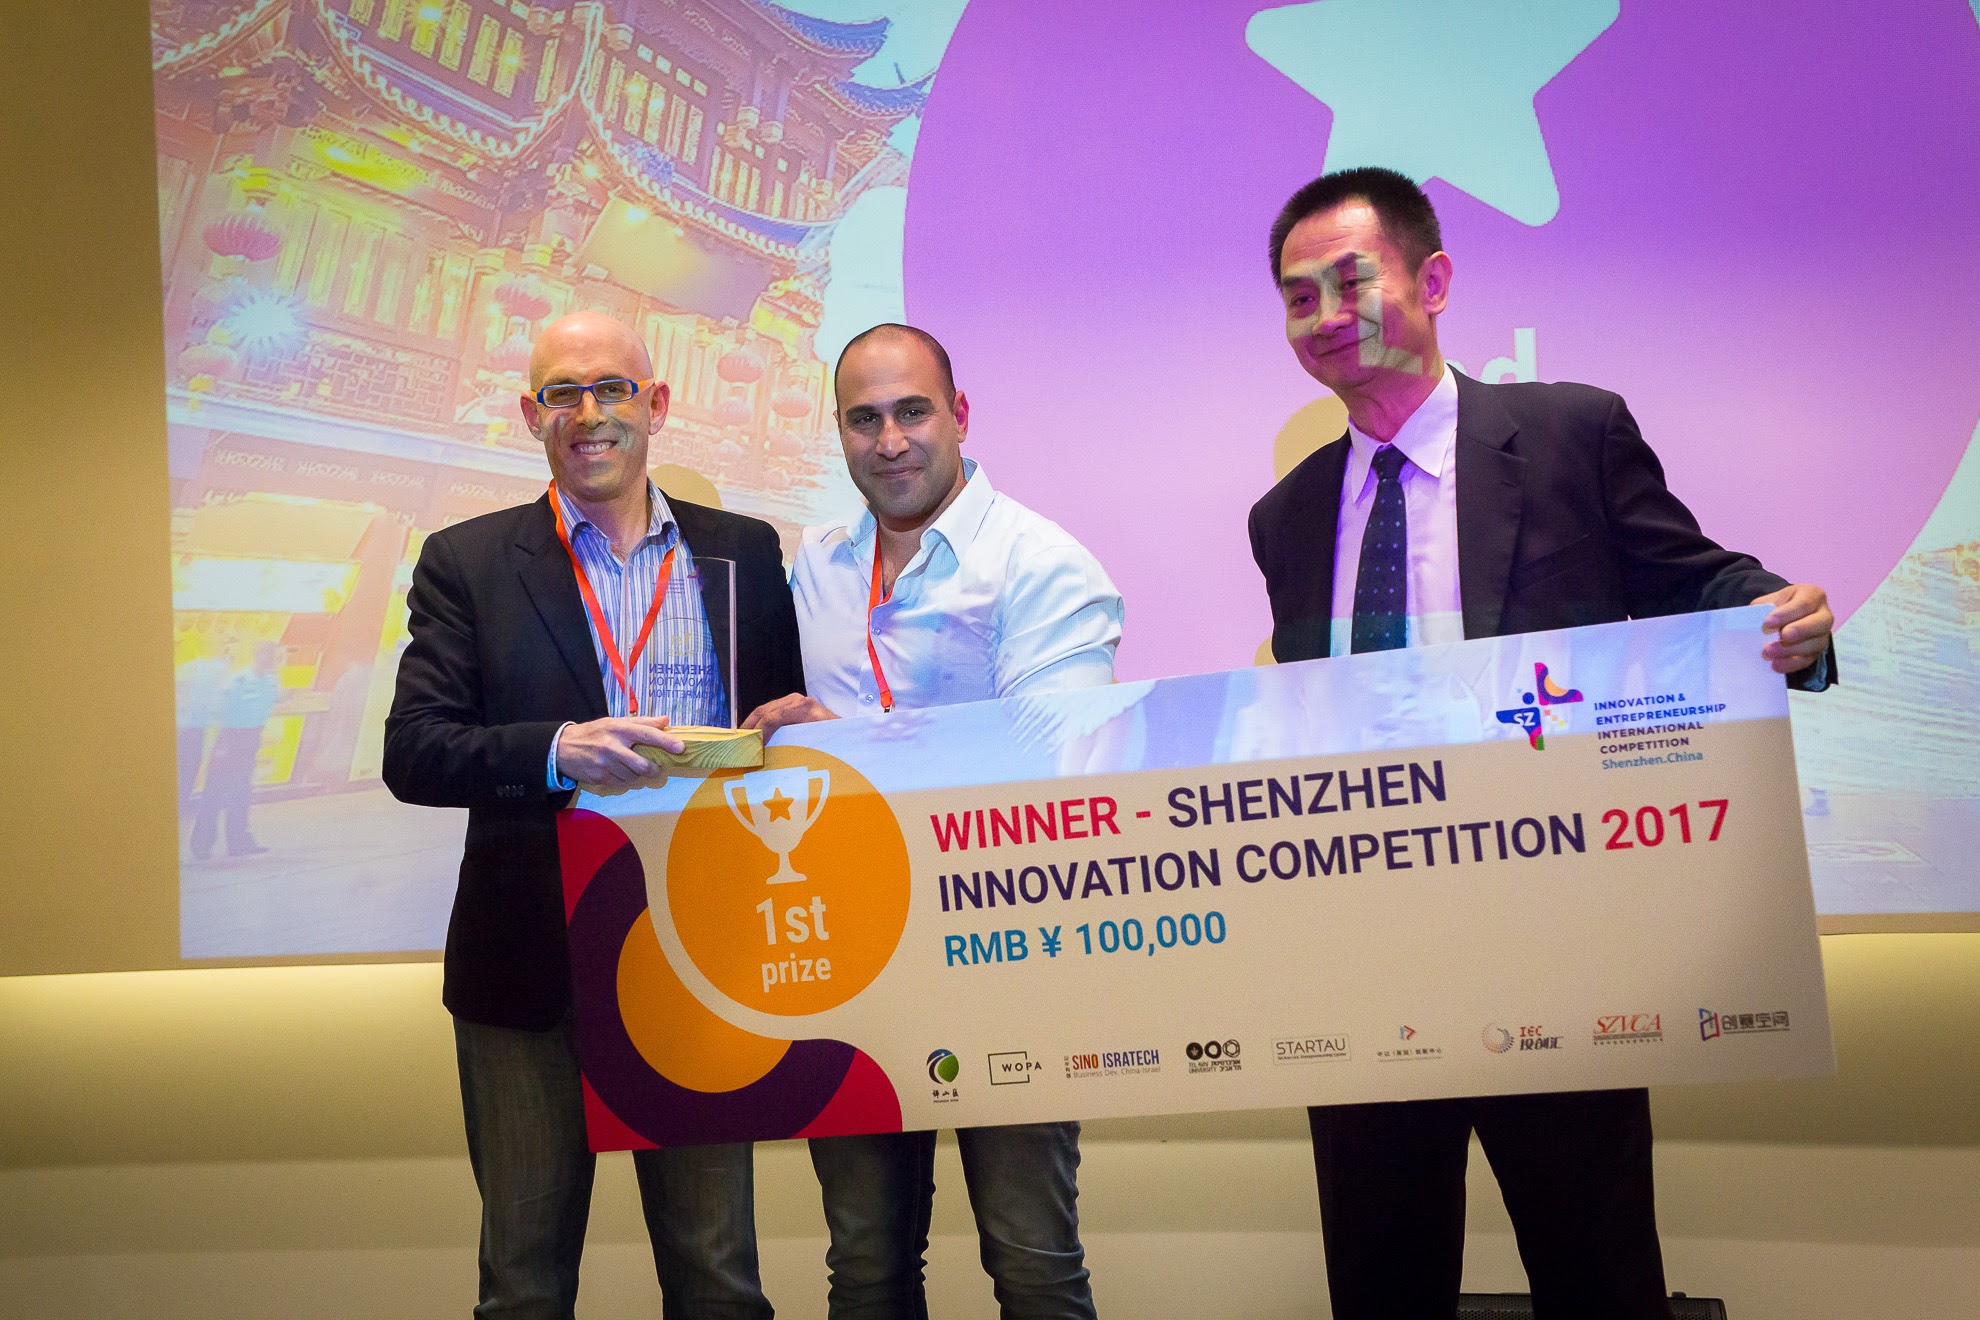 Superb Reality to win 1st place award and RMB 100,000